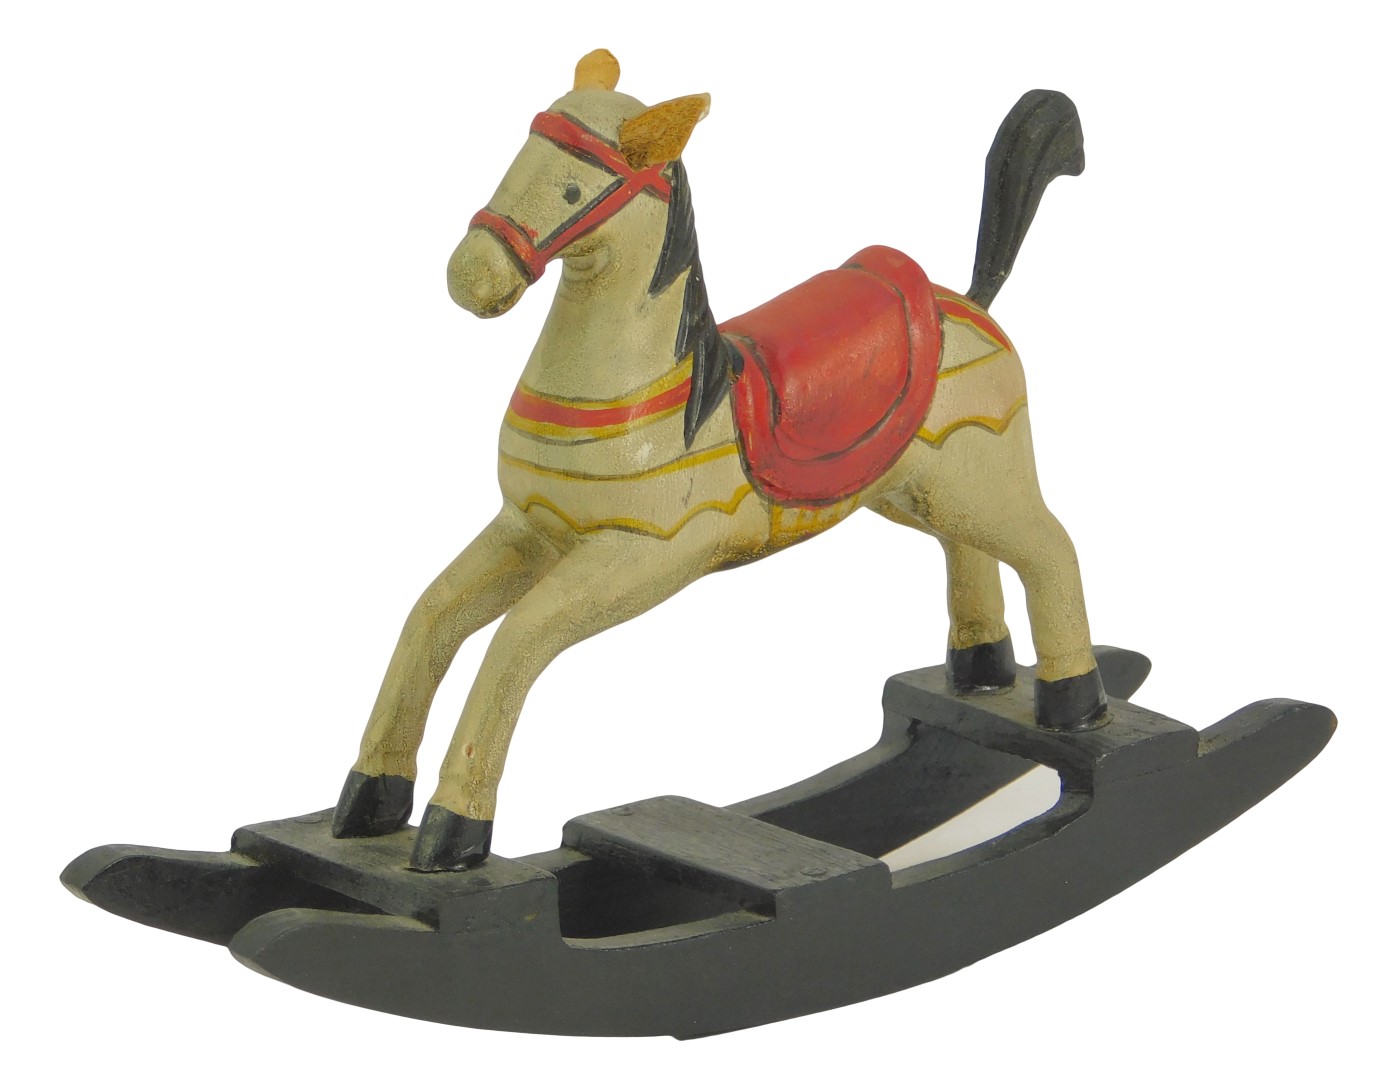 A miniature rocking horse, with red seat on painted white horse, 9cm high.